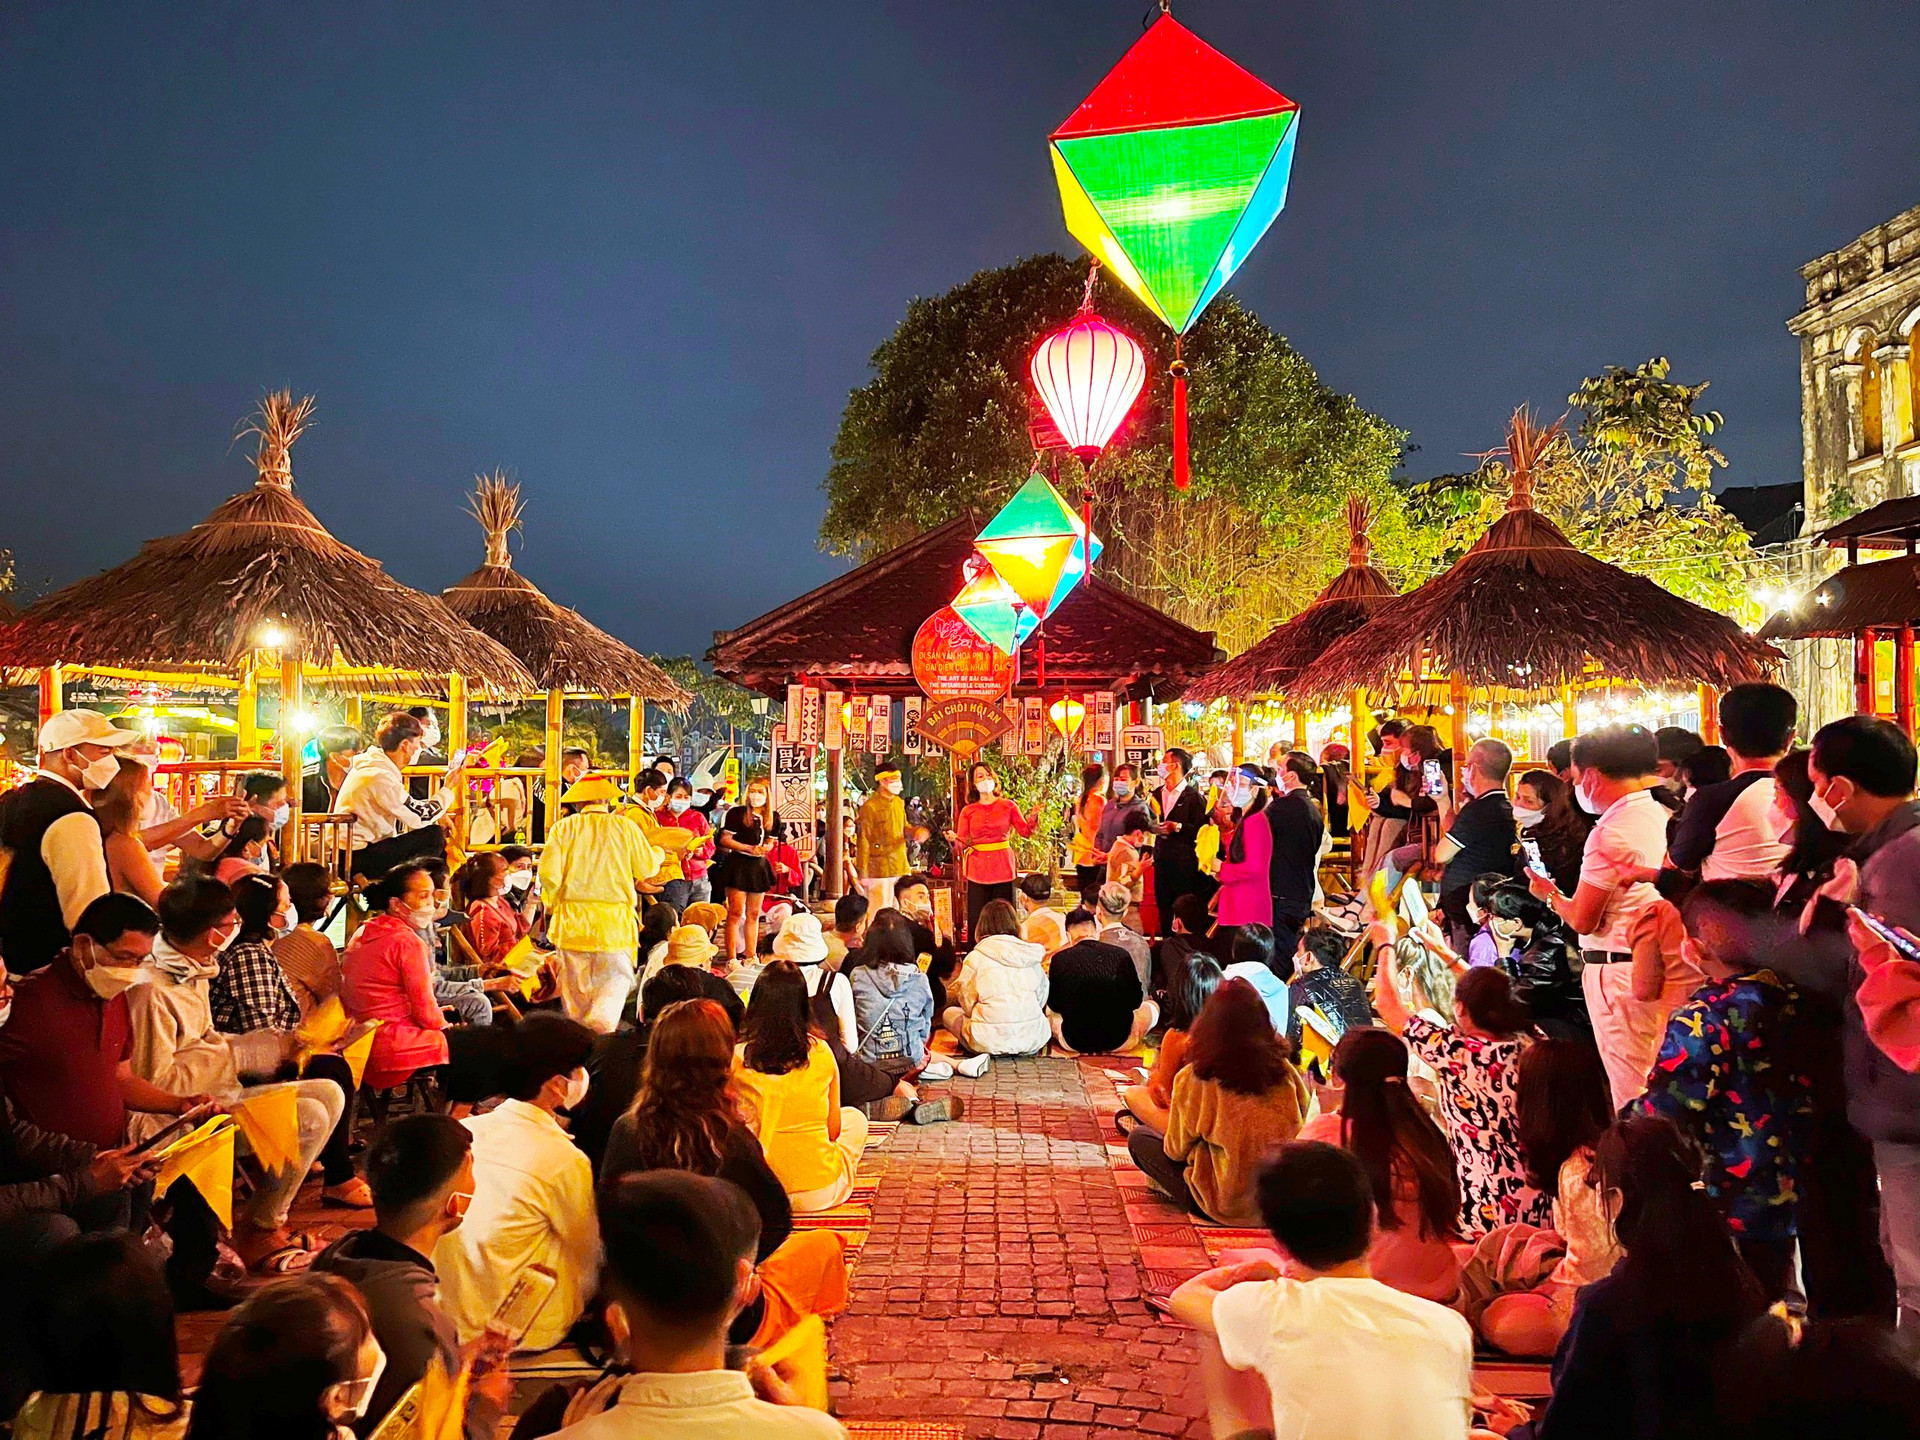 Hoi An develops tourism products from culture